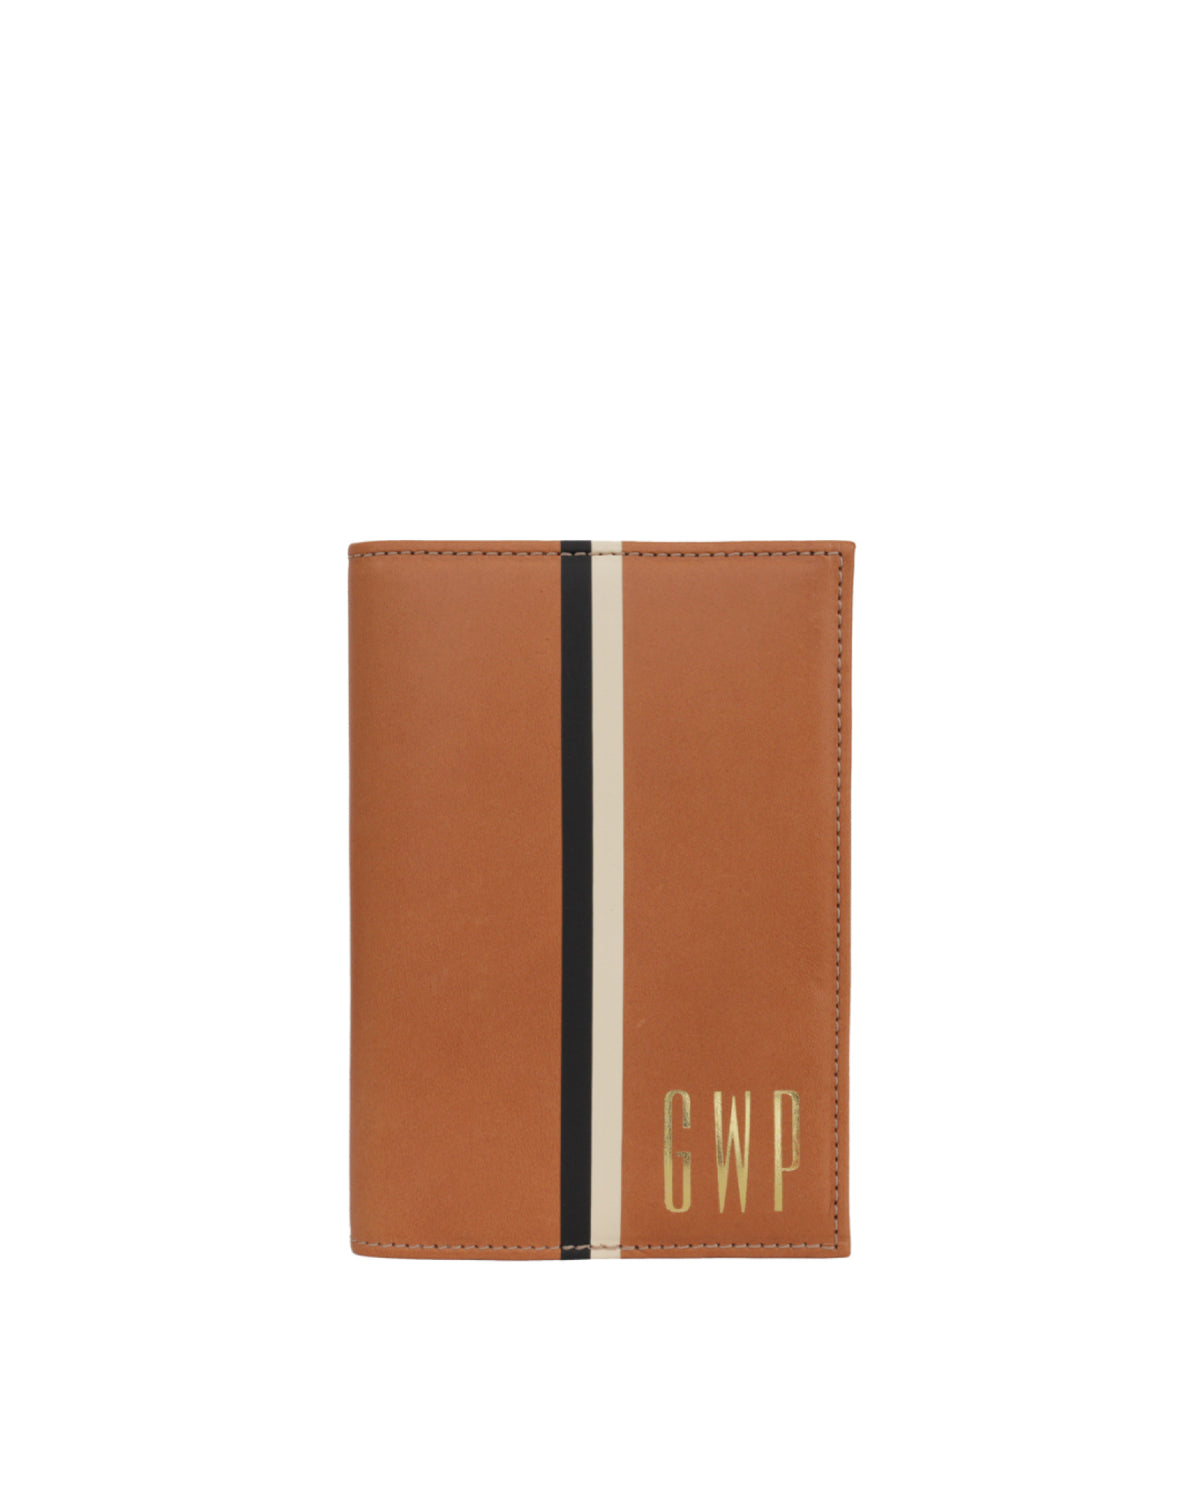 Cuoio with Black and Cream Stripes Passport Sleeve with Tall Gold Foil Monogram On the Lower Right Corner.